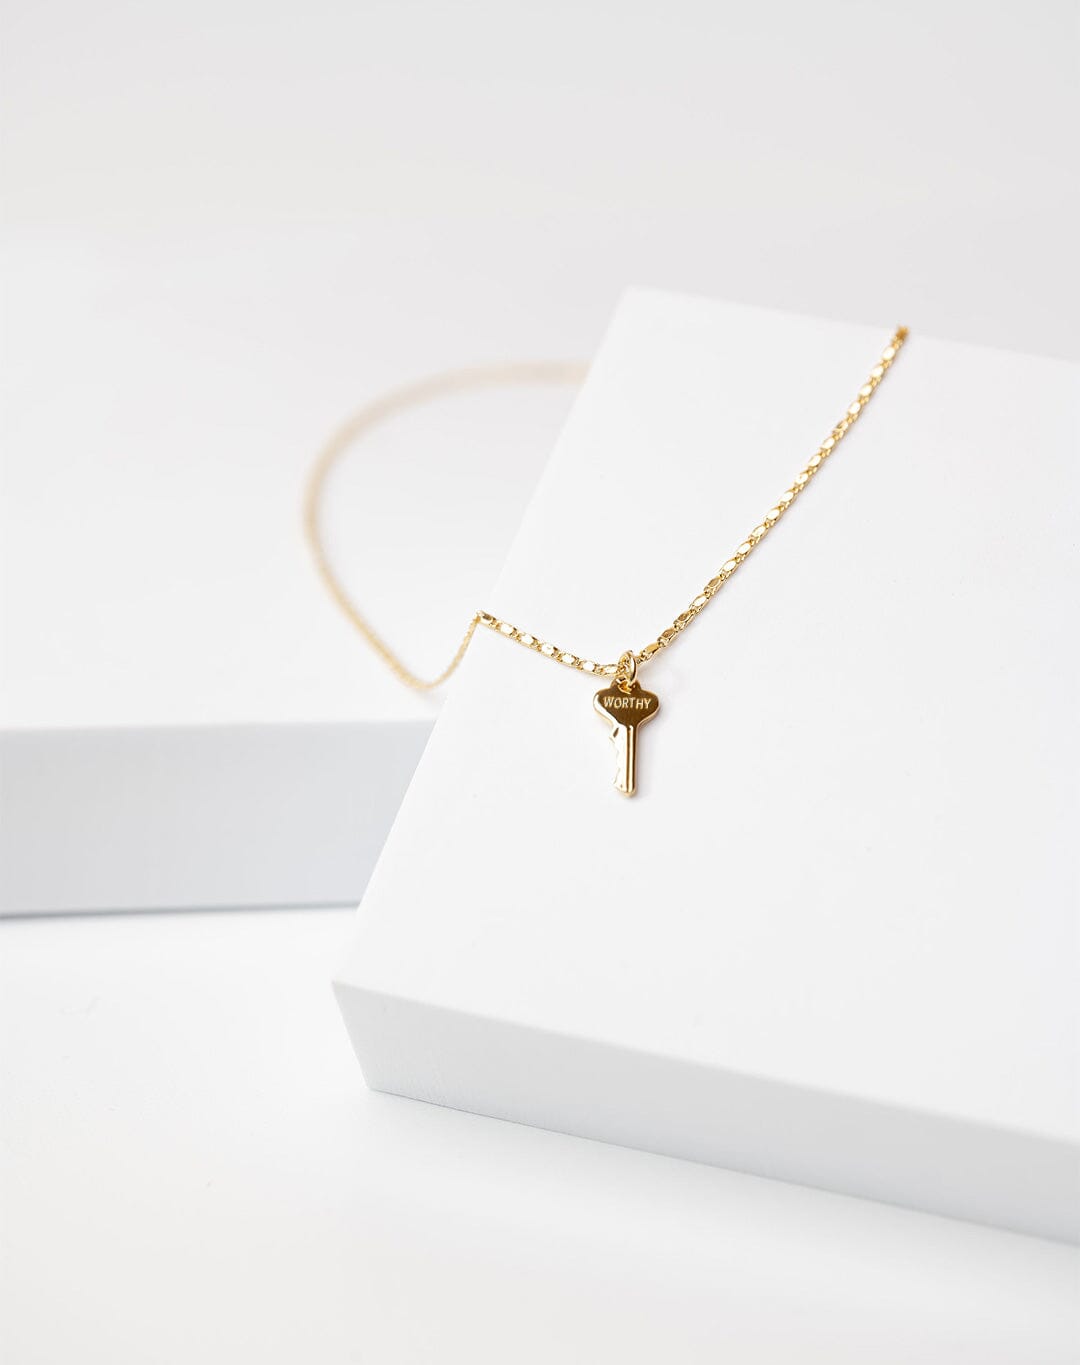 Petite Key Necklace Necklaces The Giving Keys WORTHY GOLD 